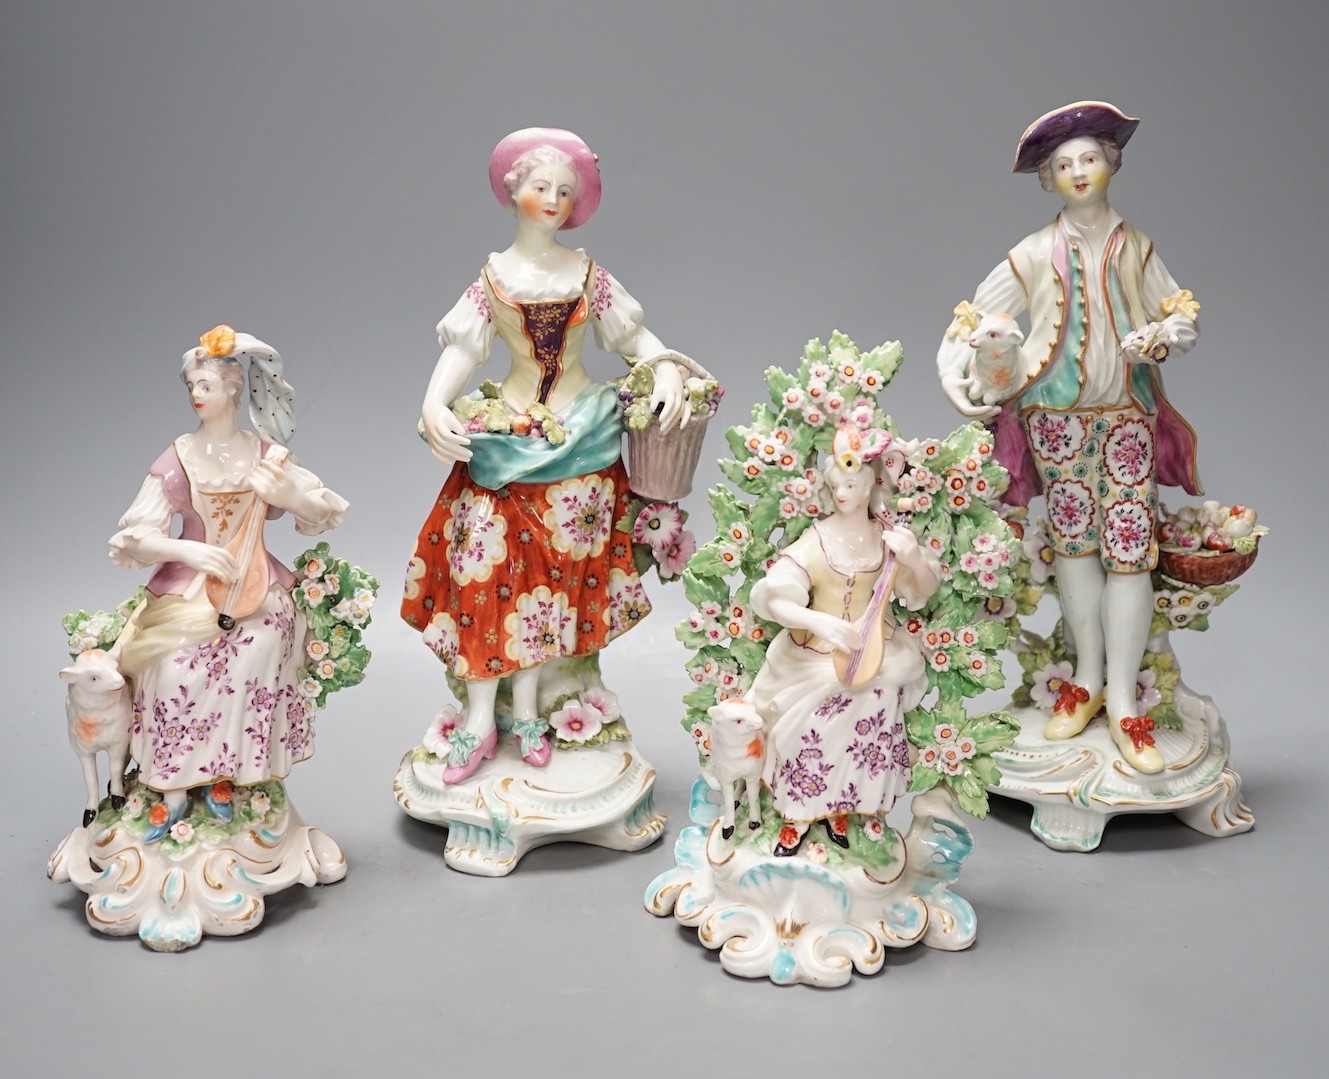 Four late 18th century Derby figures of a shepherd, a flower seller and two lute players - tallest 26cm